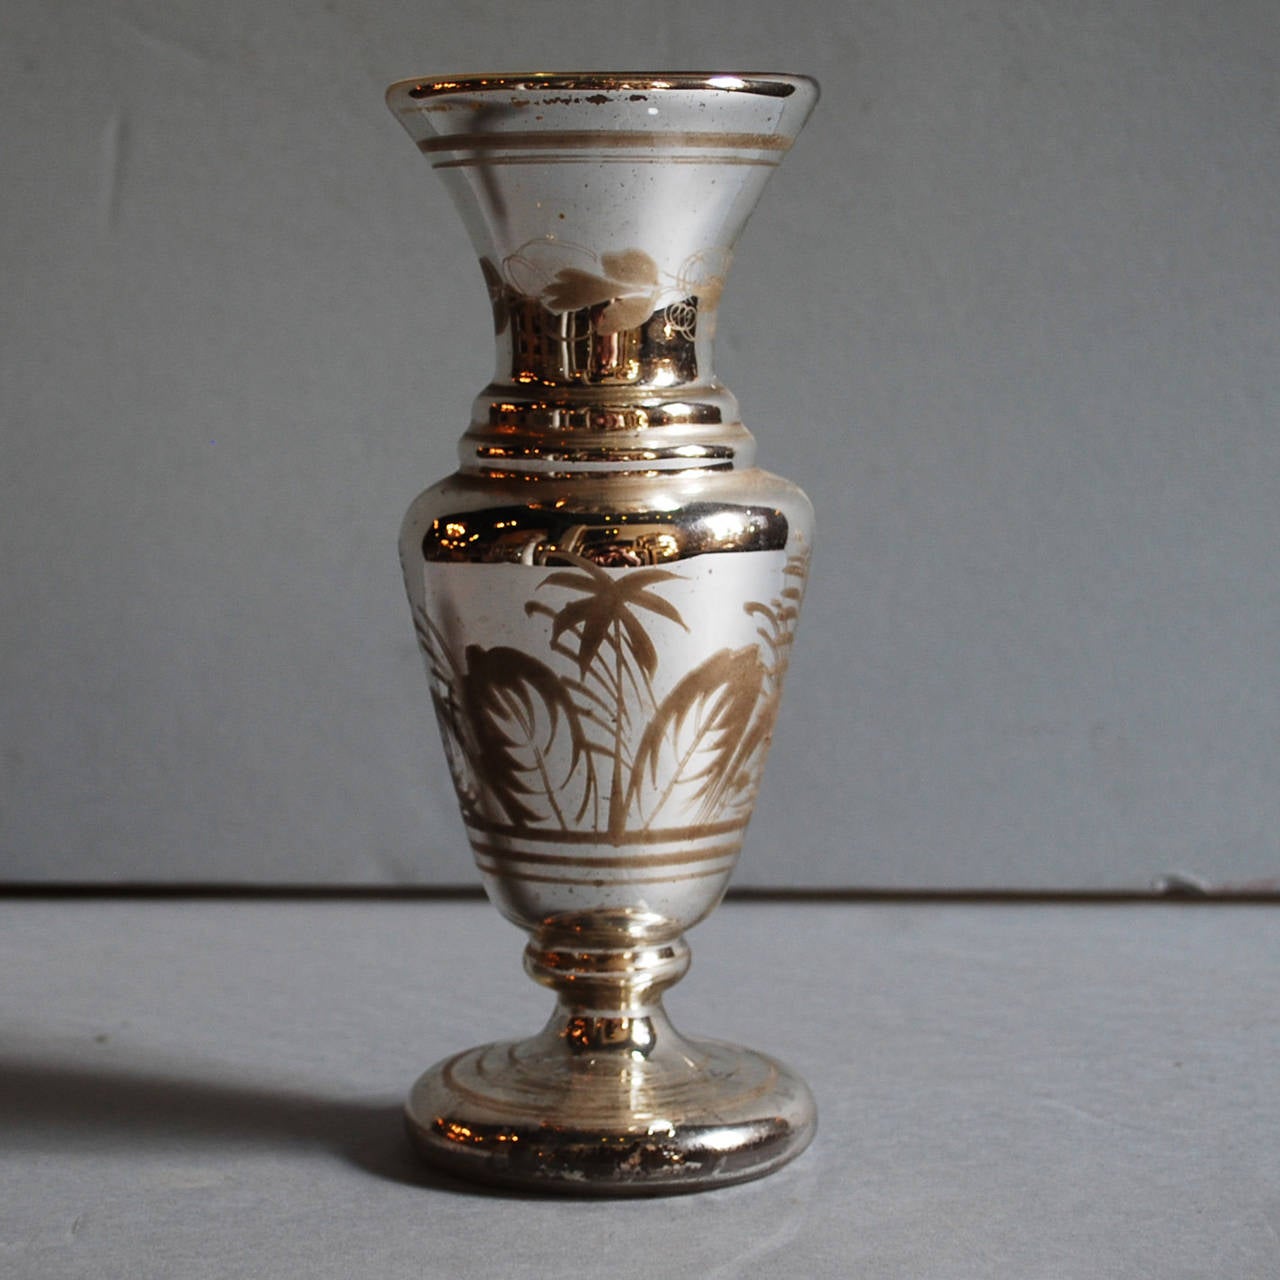 French mercury glass vase.
Made circa 1850 and still in a beautiful condition.
This glass was blown double walled, at the bottom you can see were the mold-blow pipe was attached.
Silvered 